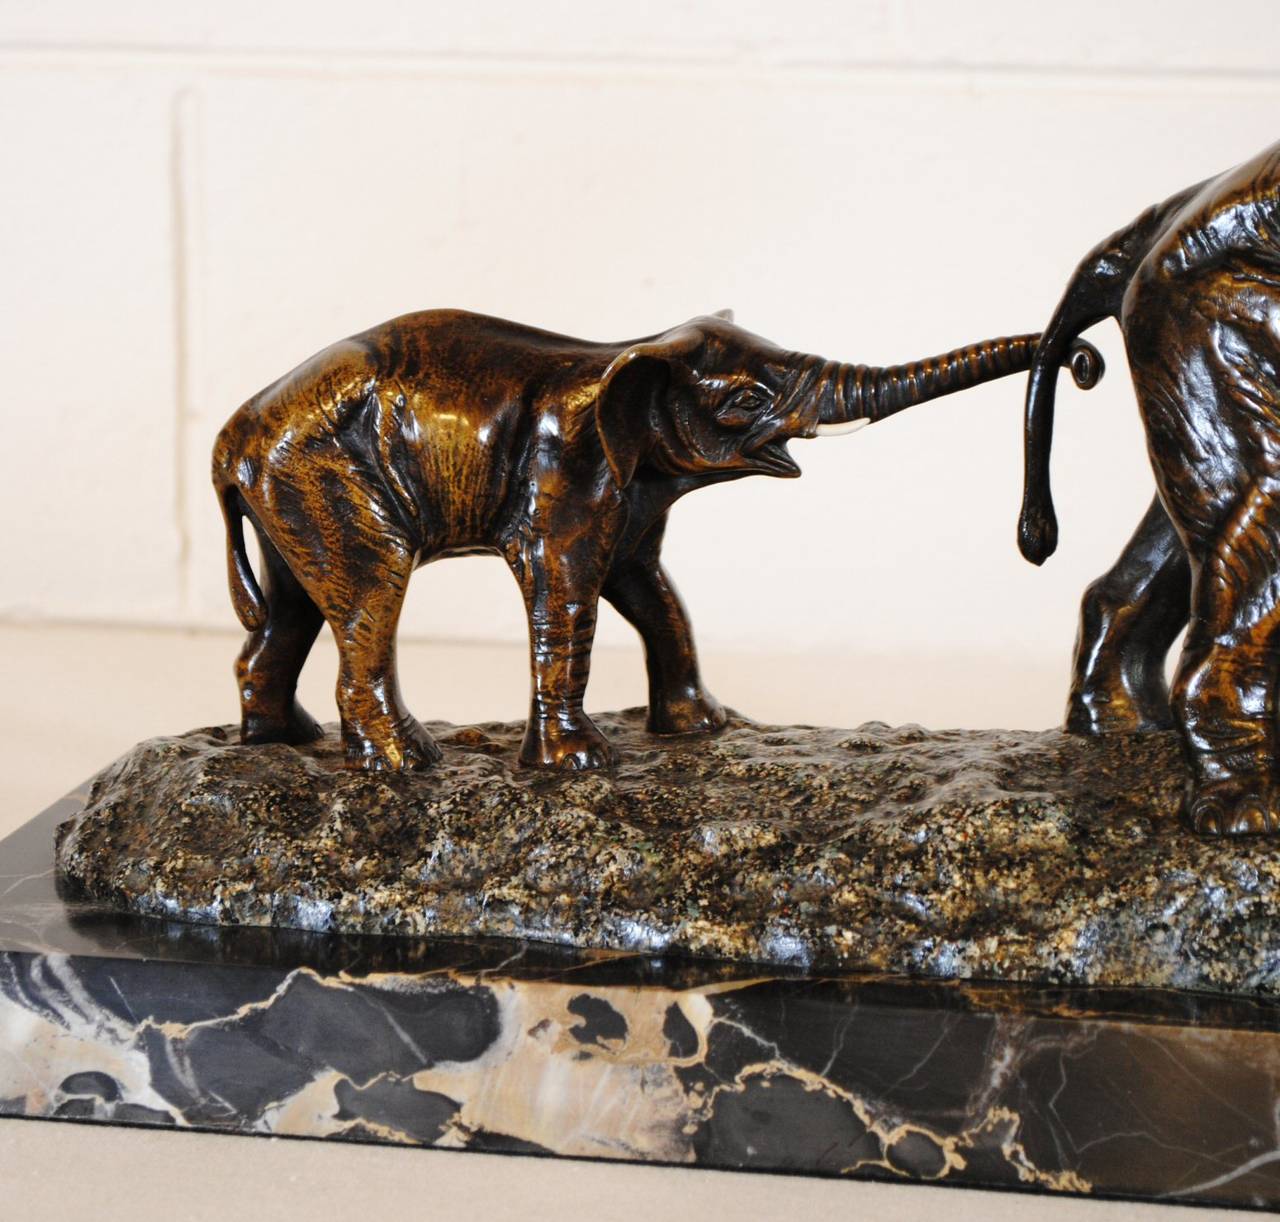 Superb French bronze sculpture of a mother elephant and her calf. The signature of Irénée Rochard impressed into the rocks near the elephants foot. The piece dates from the 1930s.